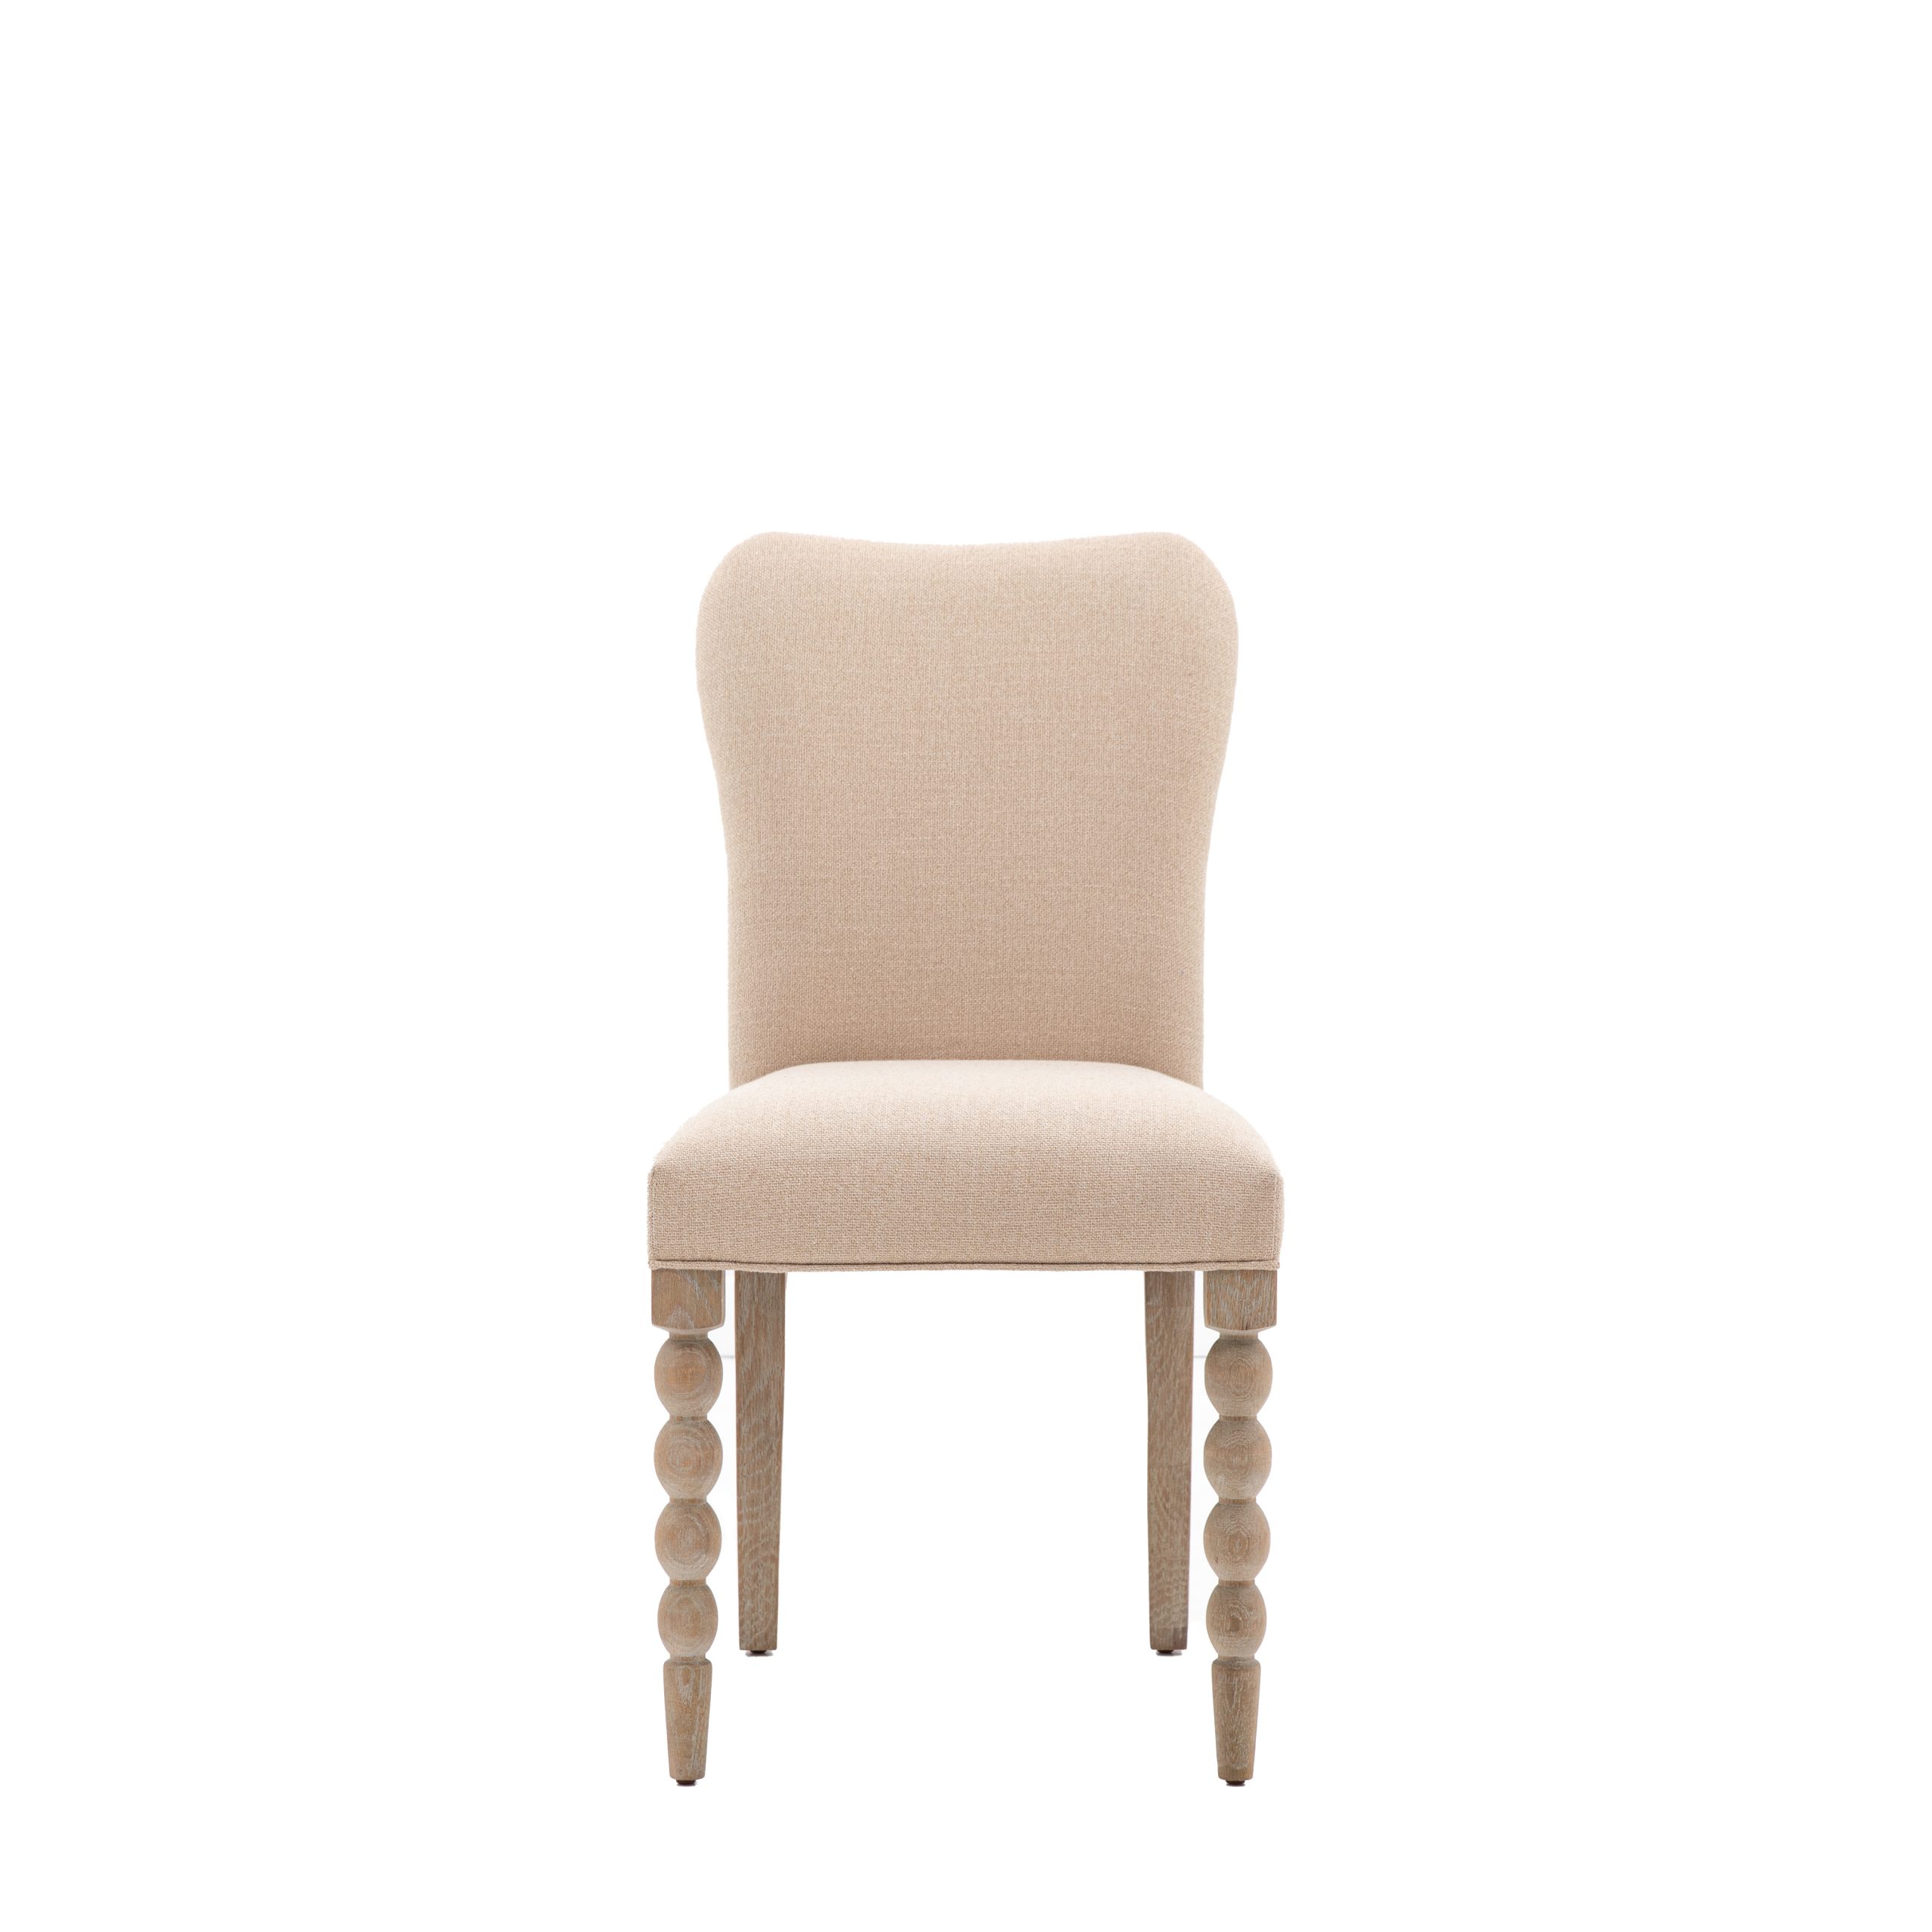 Gallery Direct Artisan Dining Chair (Set of 2)